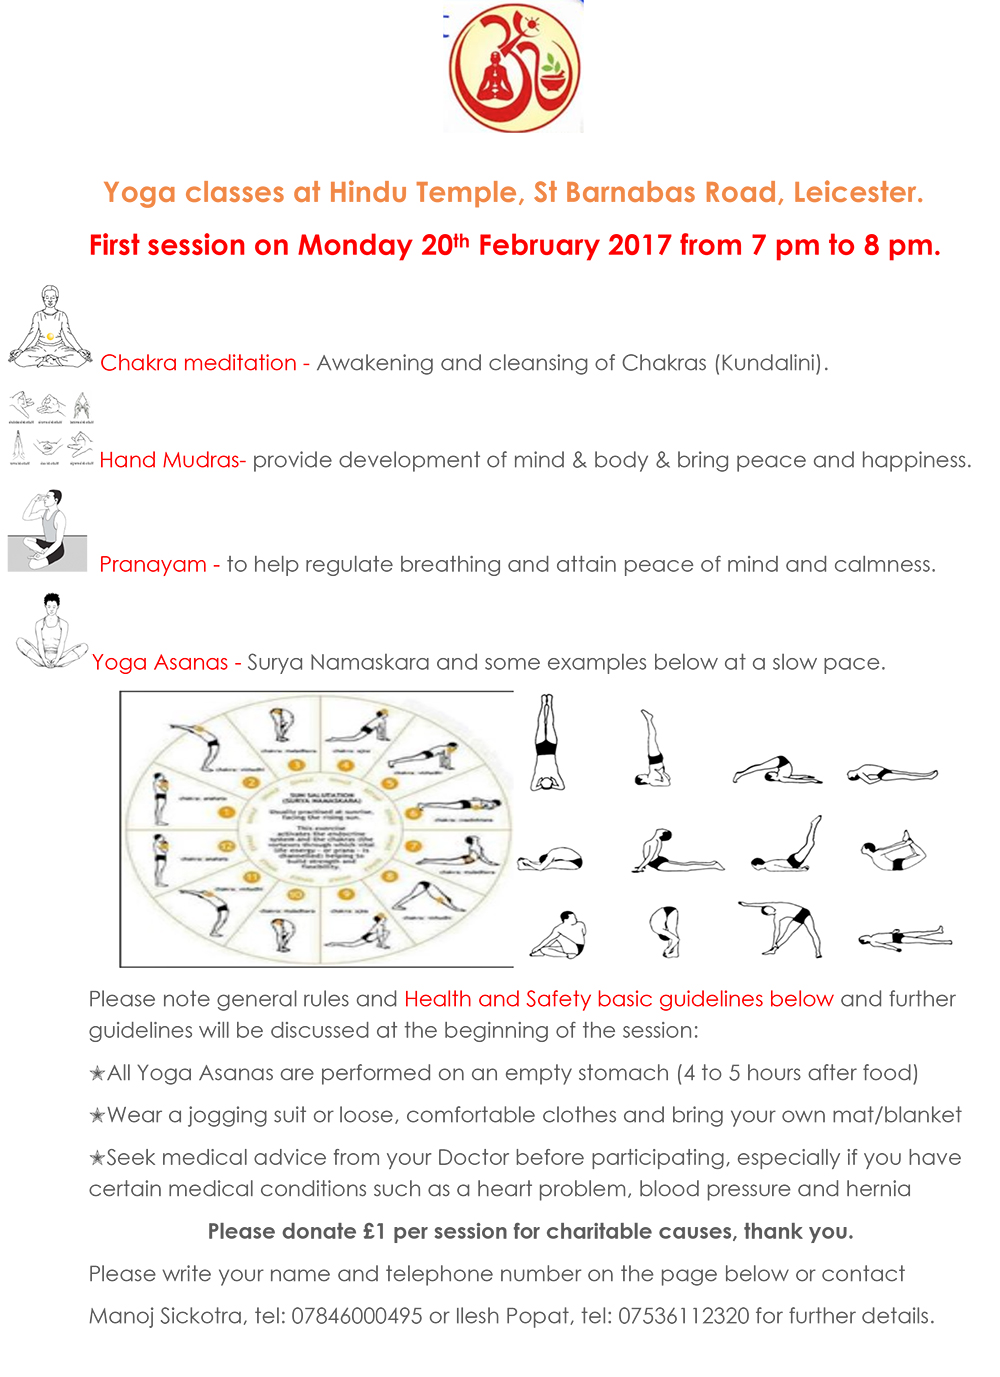 Yoga classes at Hindu Temple, St Barnabas Road, Leicester.  First session on Monday 20th February 2017 from 7 pm to 8 pm